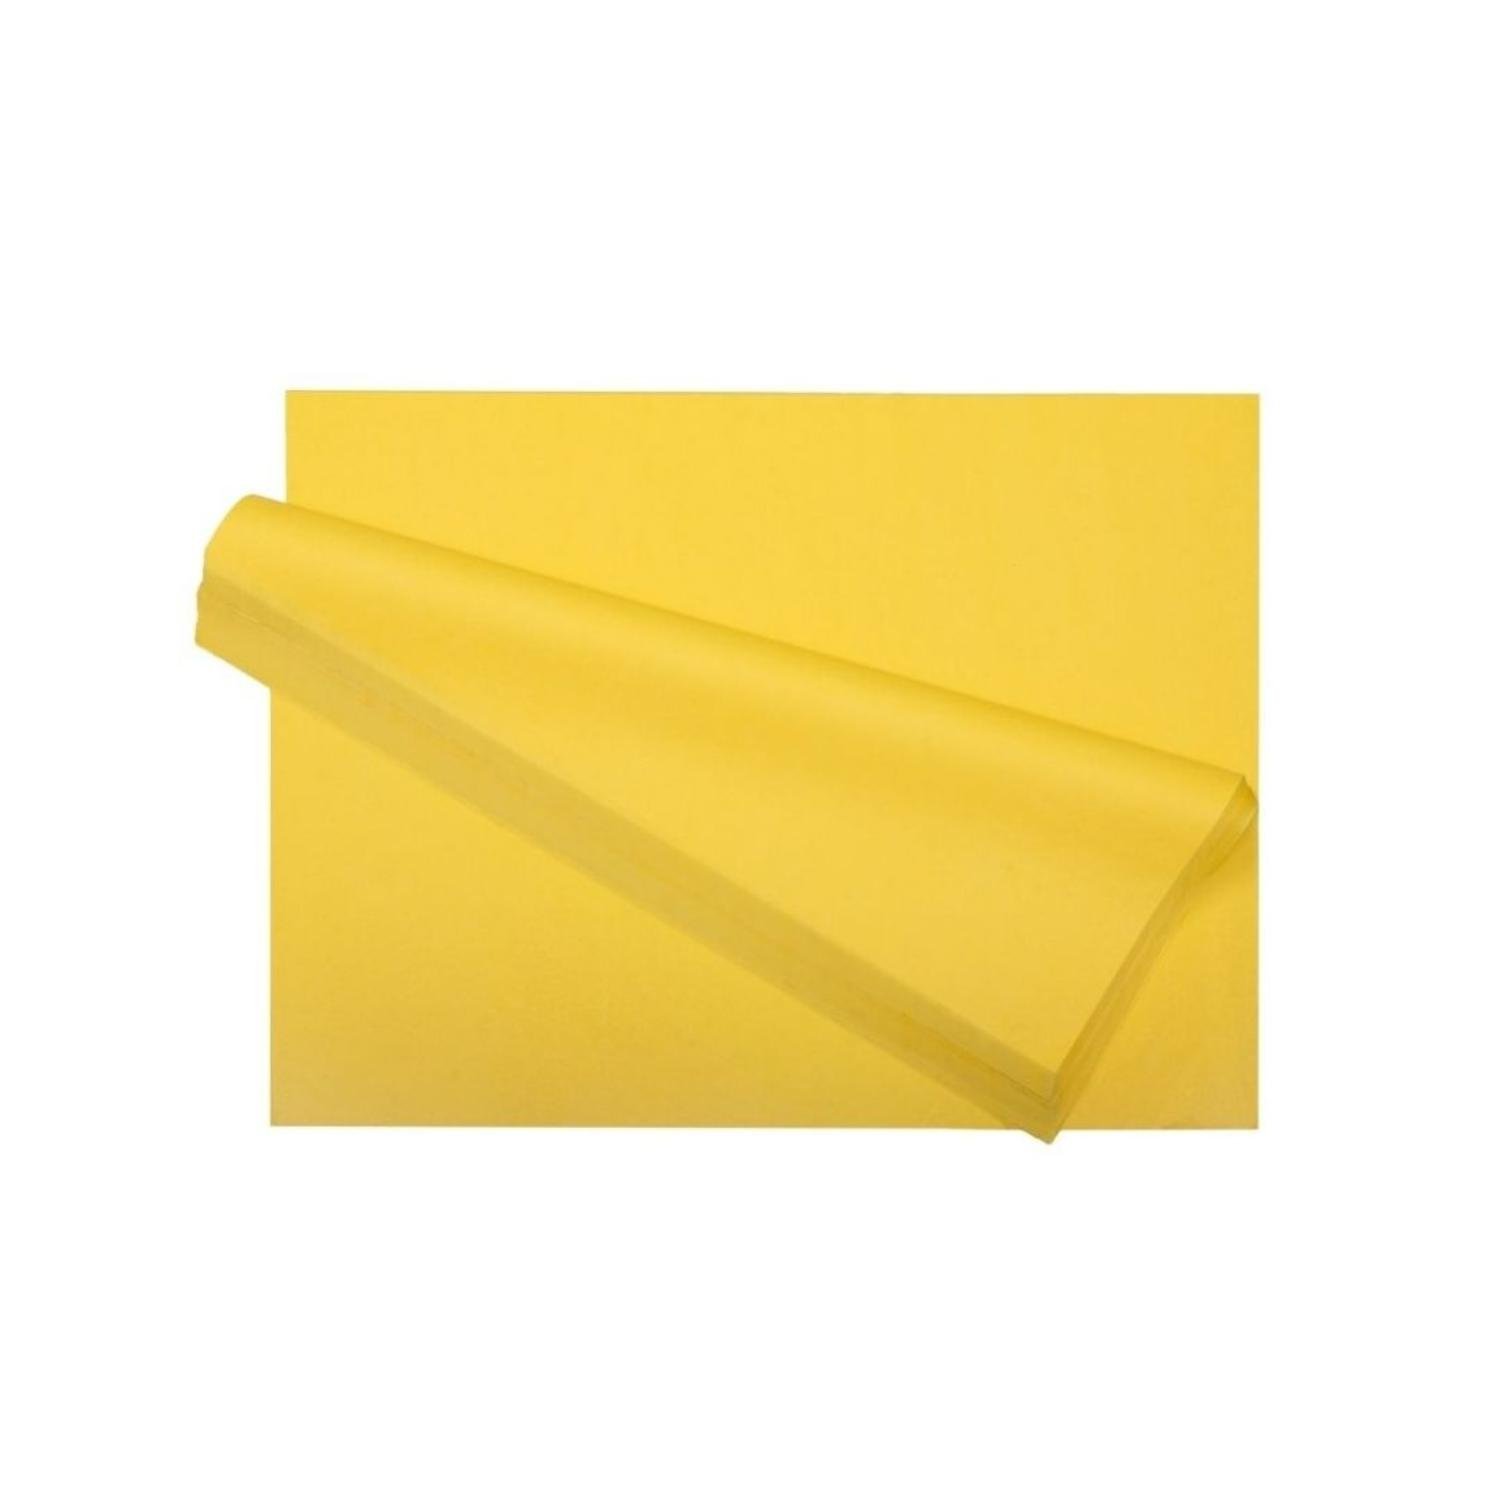 YELLOW TISSUE REAM 15" X 20" - 480 SHEETS